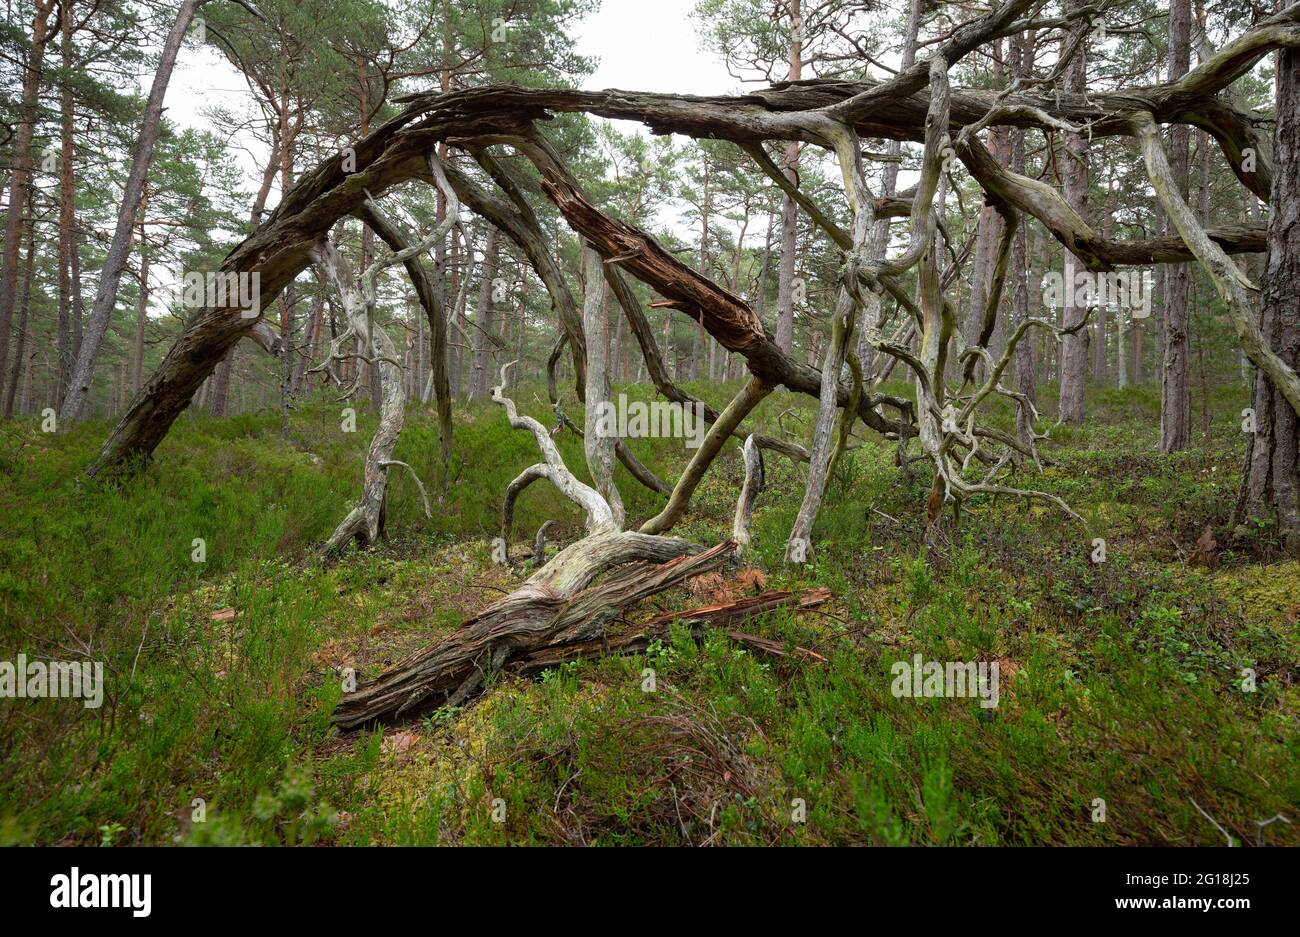 Old pine tree among heather plants in a national park in sweden, important habitat for many endangered insects Stock Photo